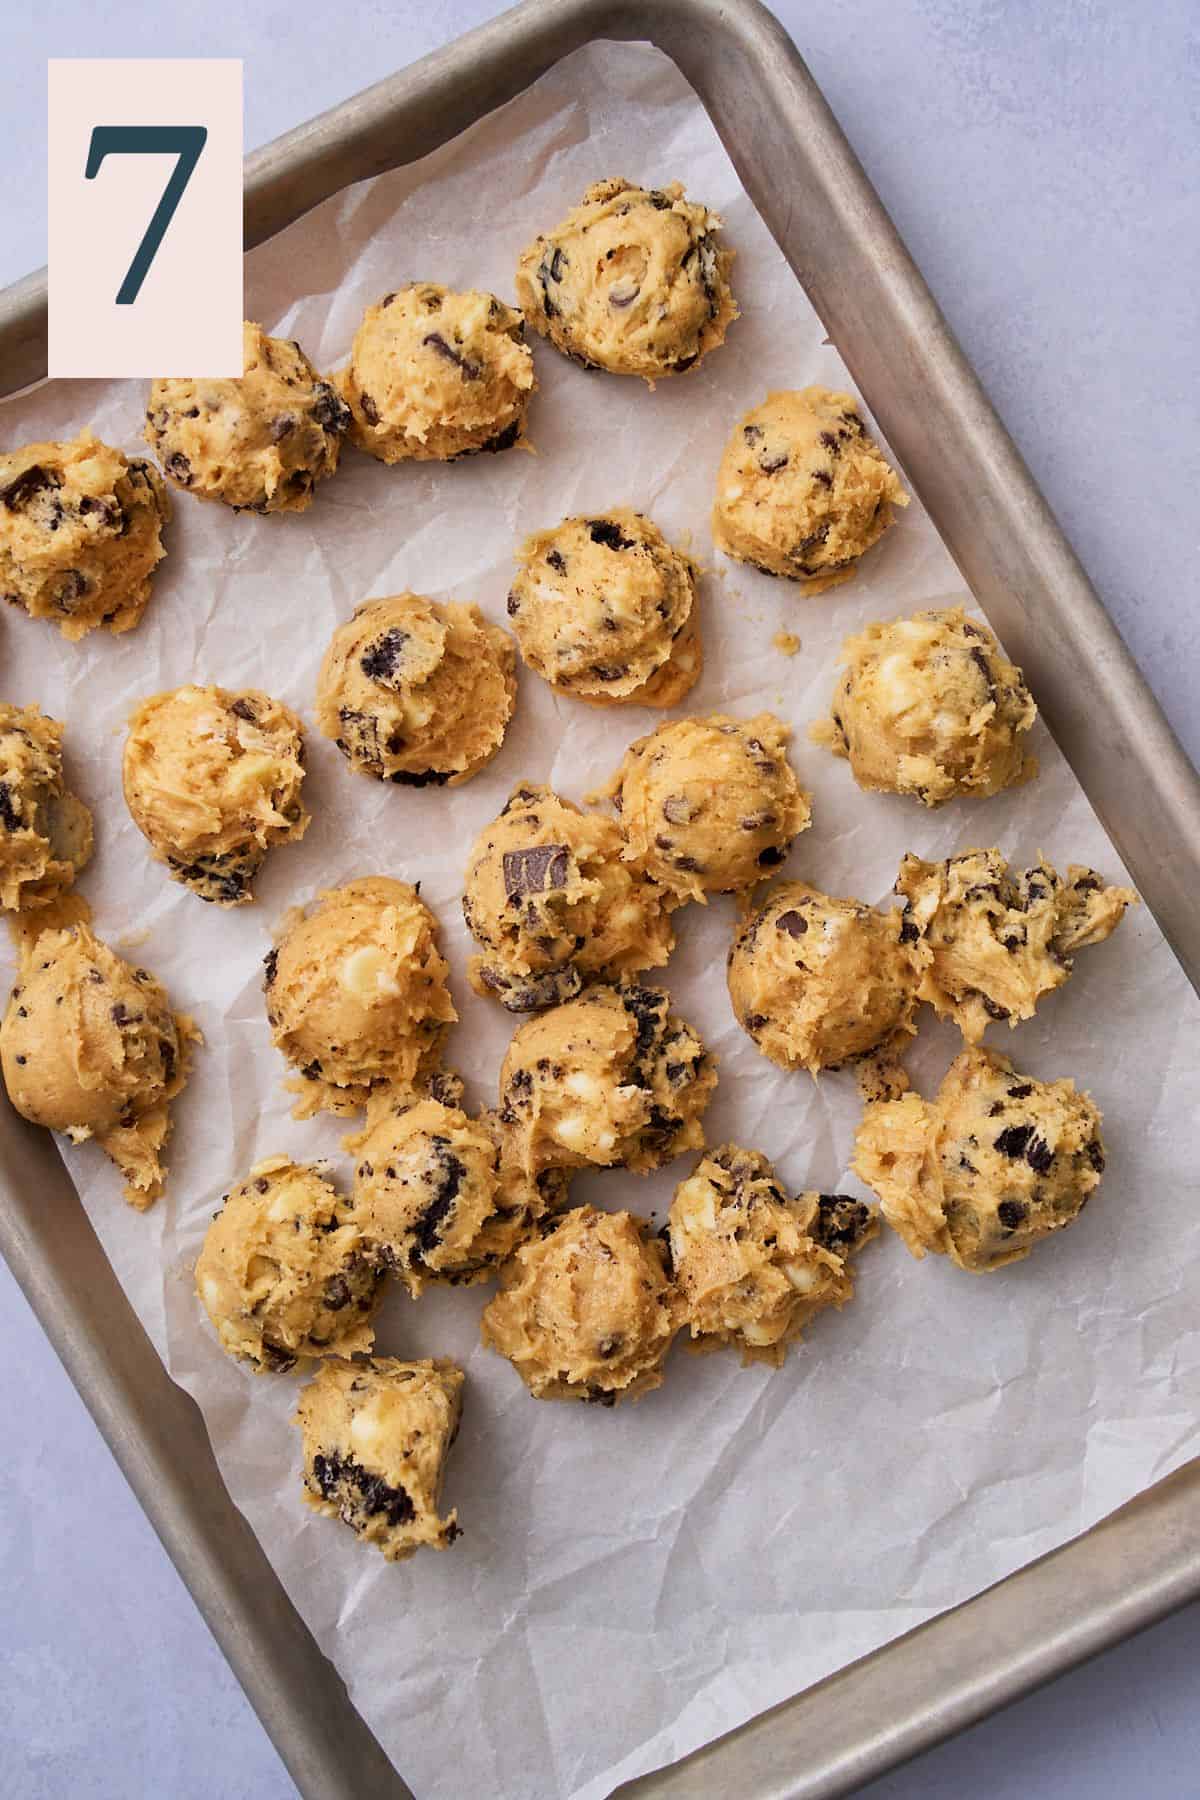 Small pieces of chocoalte chip cookie dough on a parchment lined baking sheet.